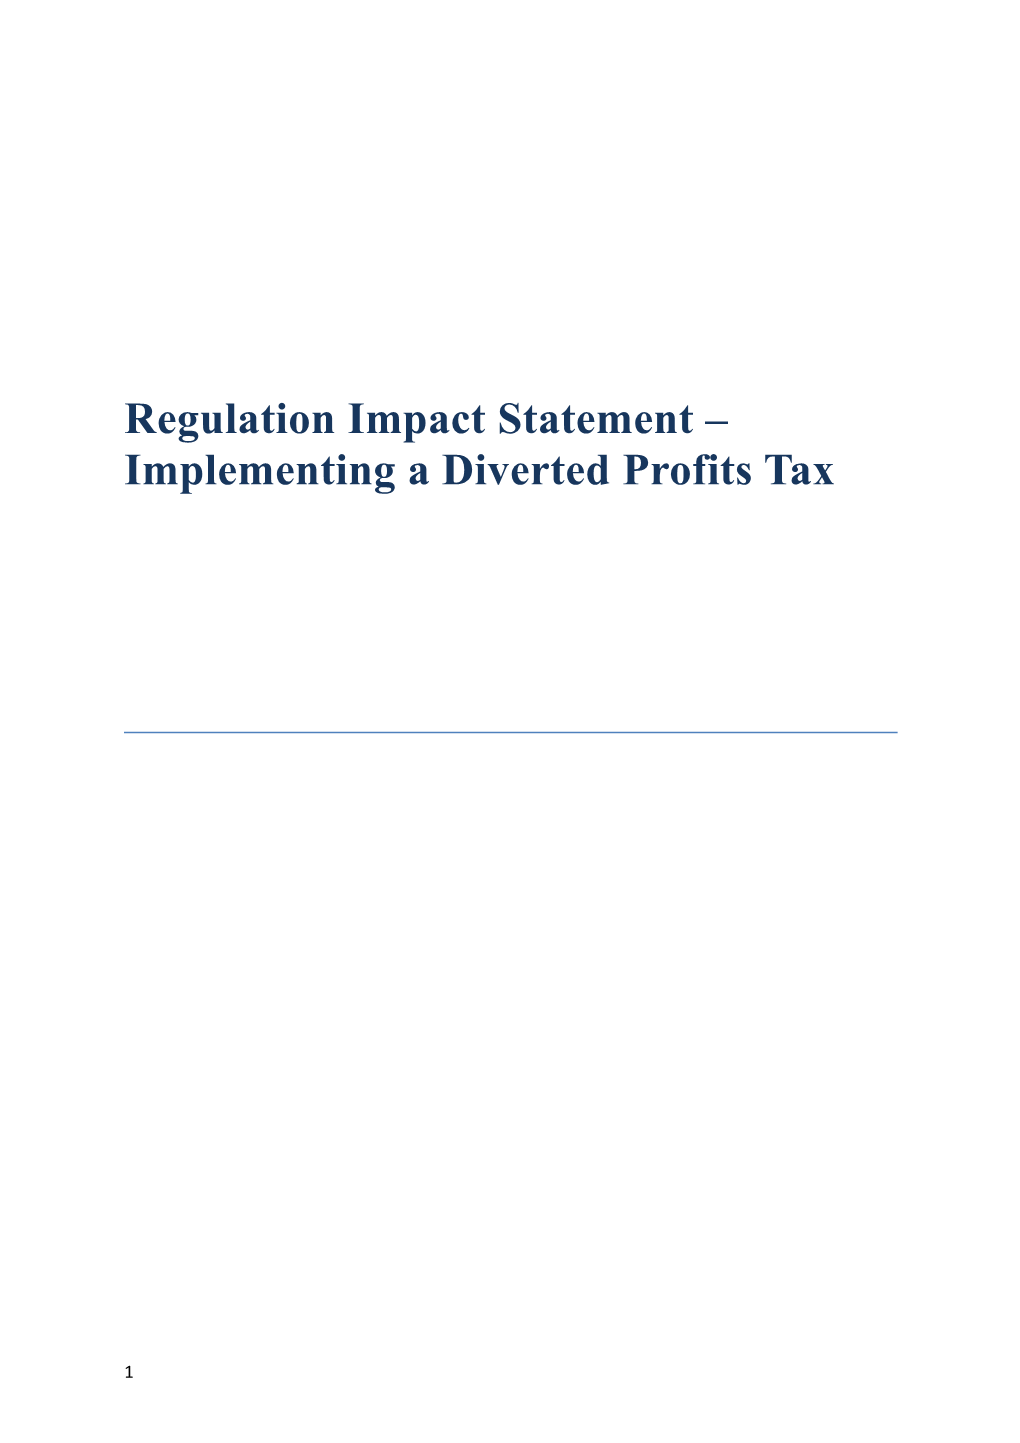 Regulation Impact Statement Implementing a Diverted Profits Tax